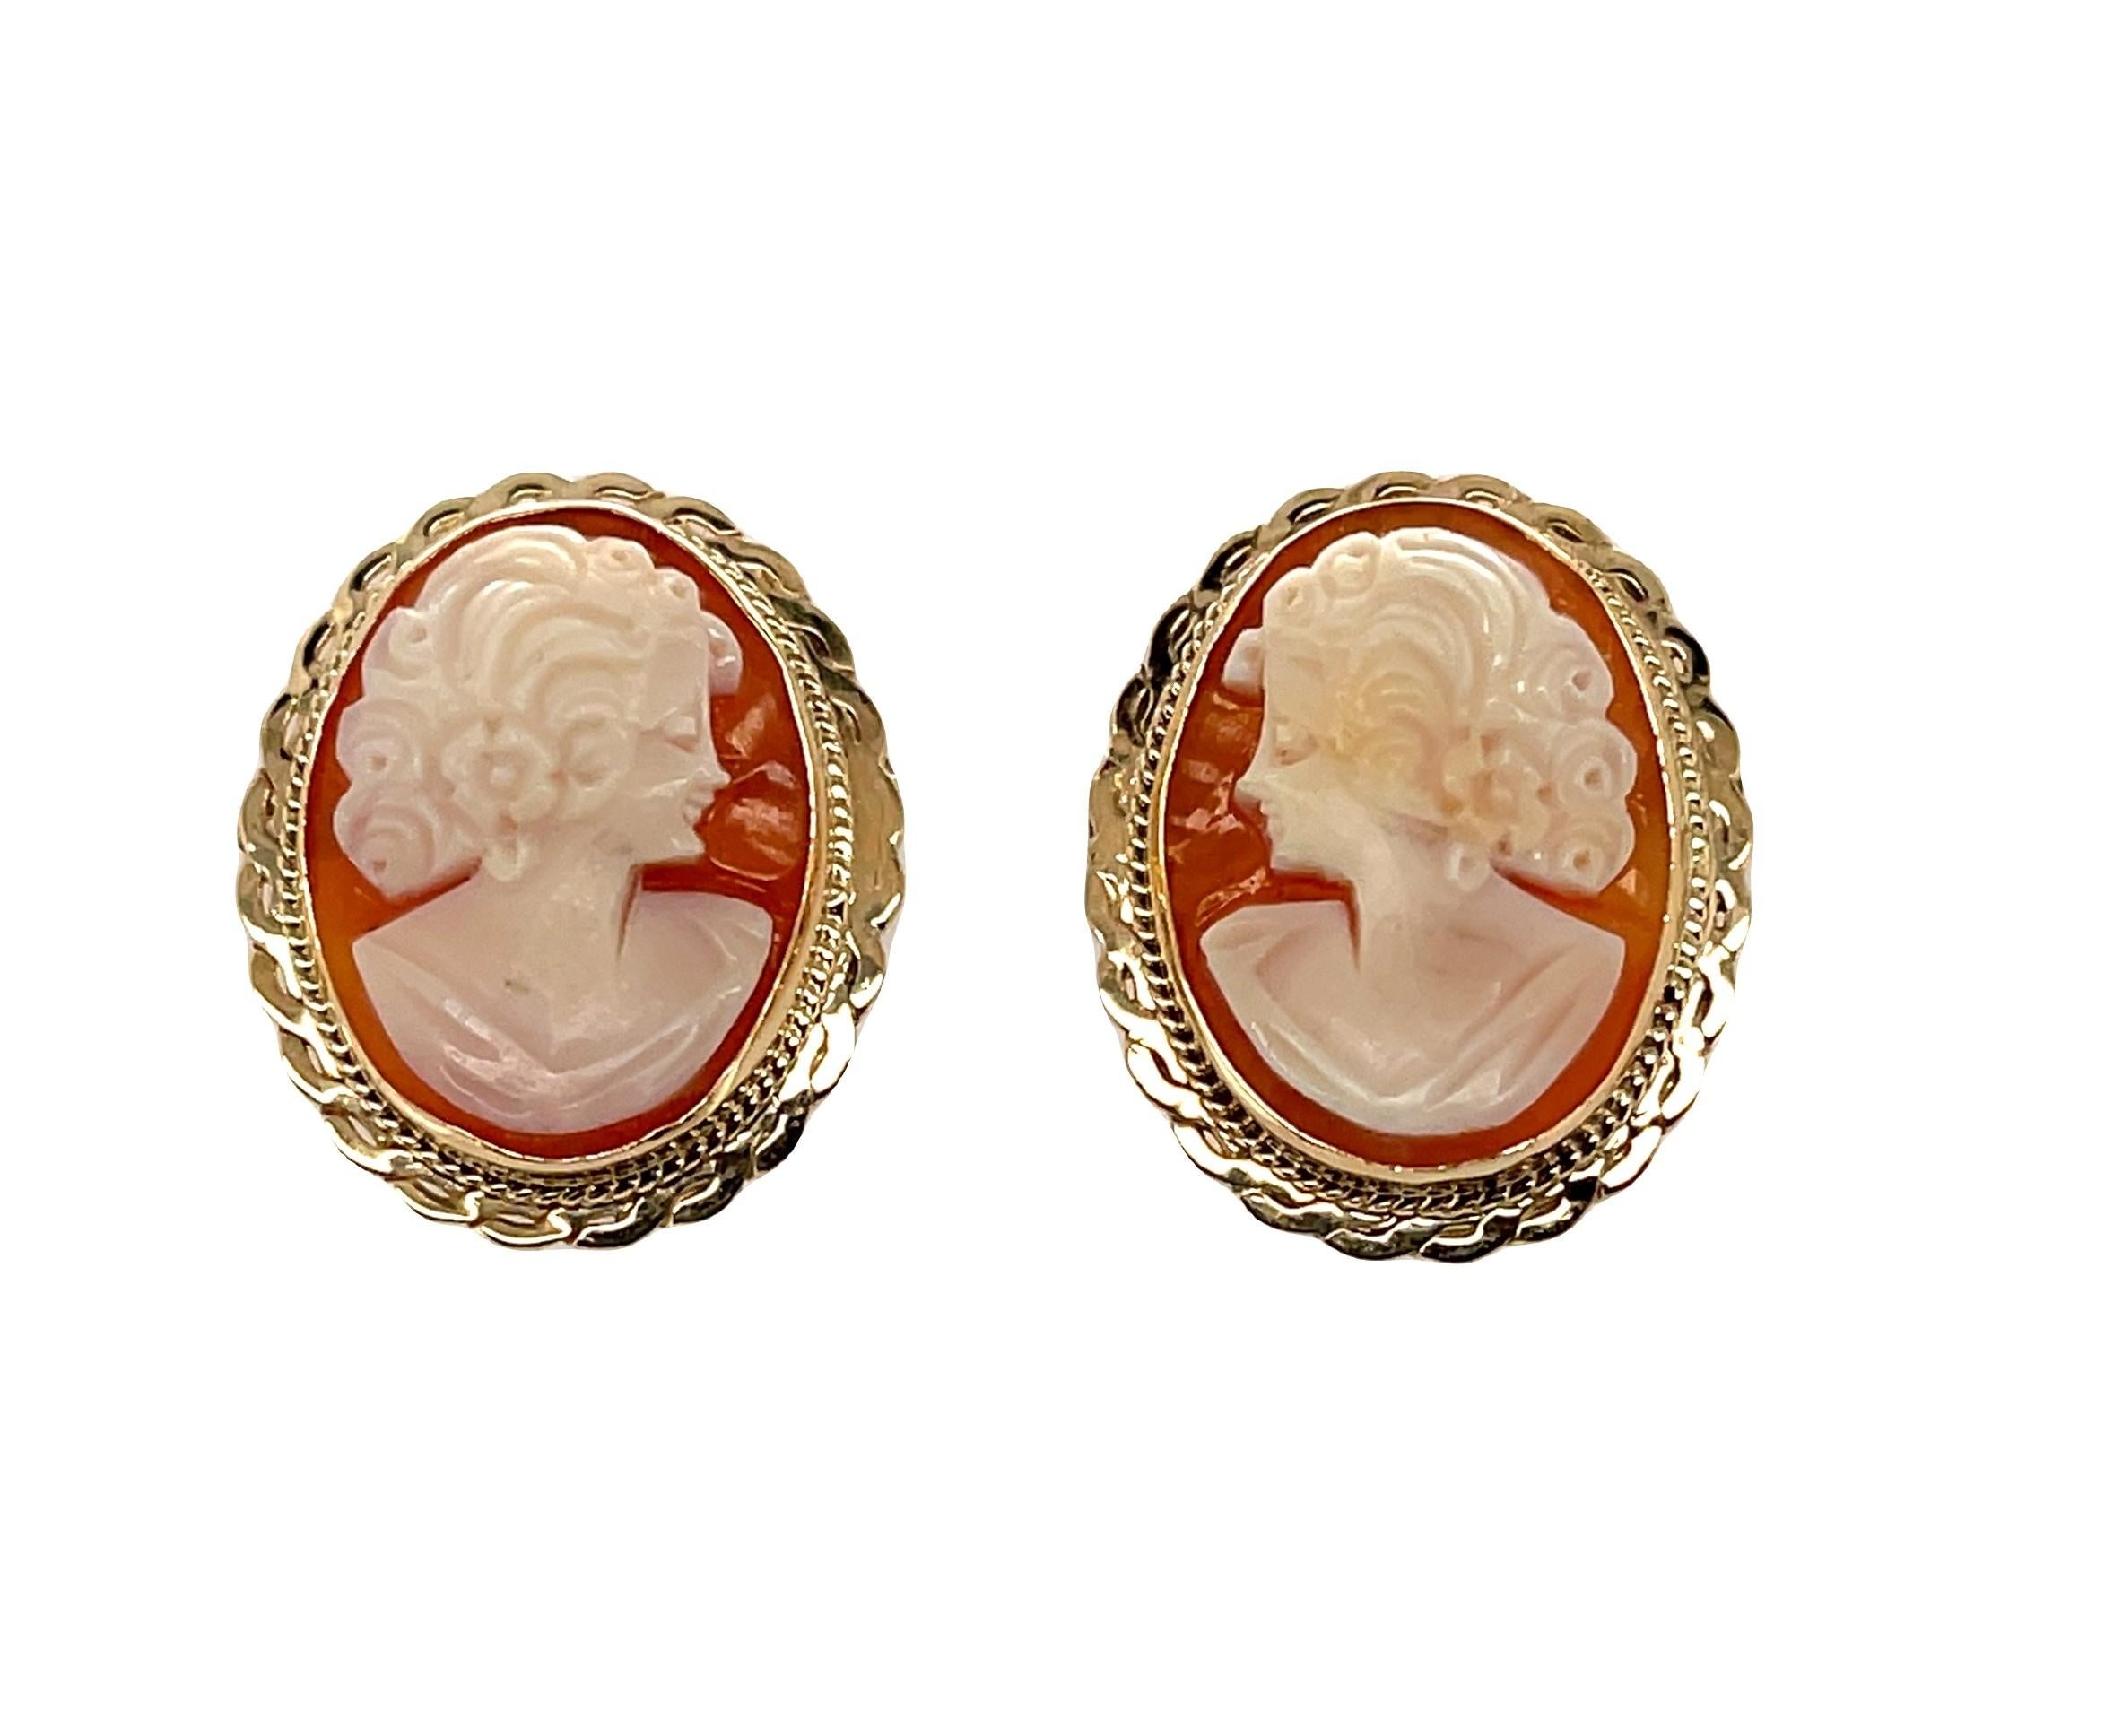 These cameo earrings are timeless classics! Beautifully hand carved Italian shell cameos have been set in custom-made 14k yellow gold bezels and embellished with exquisite detail. Perfect for everyday or special occasions! Handcrafted by our Master